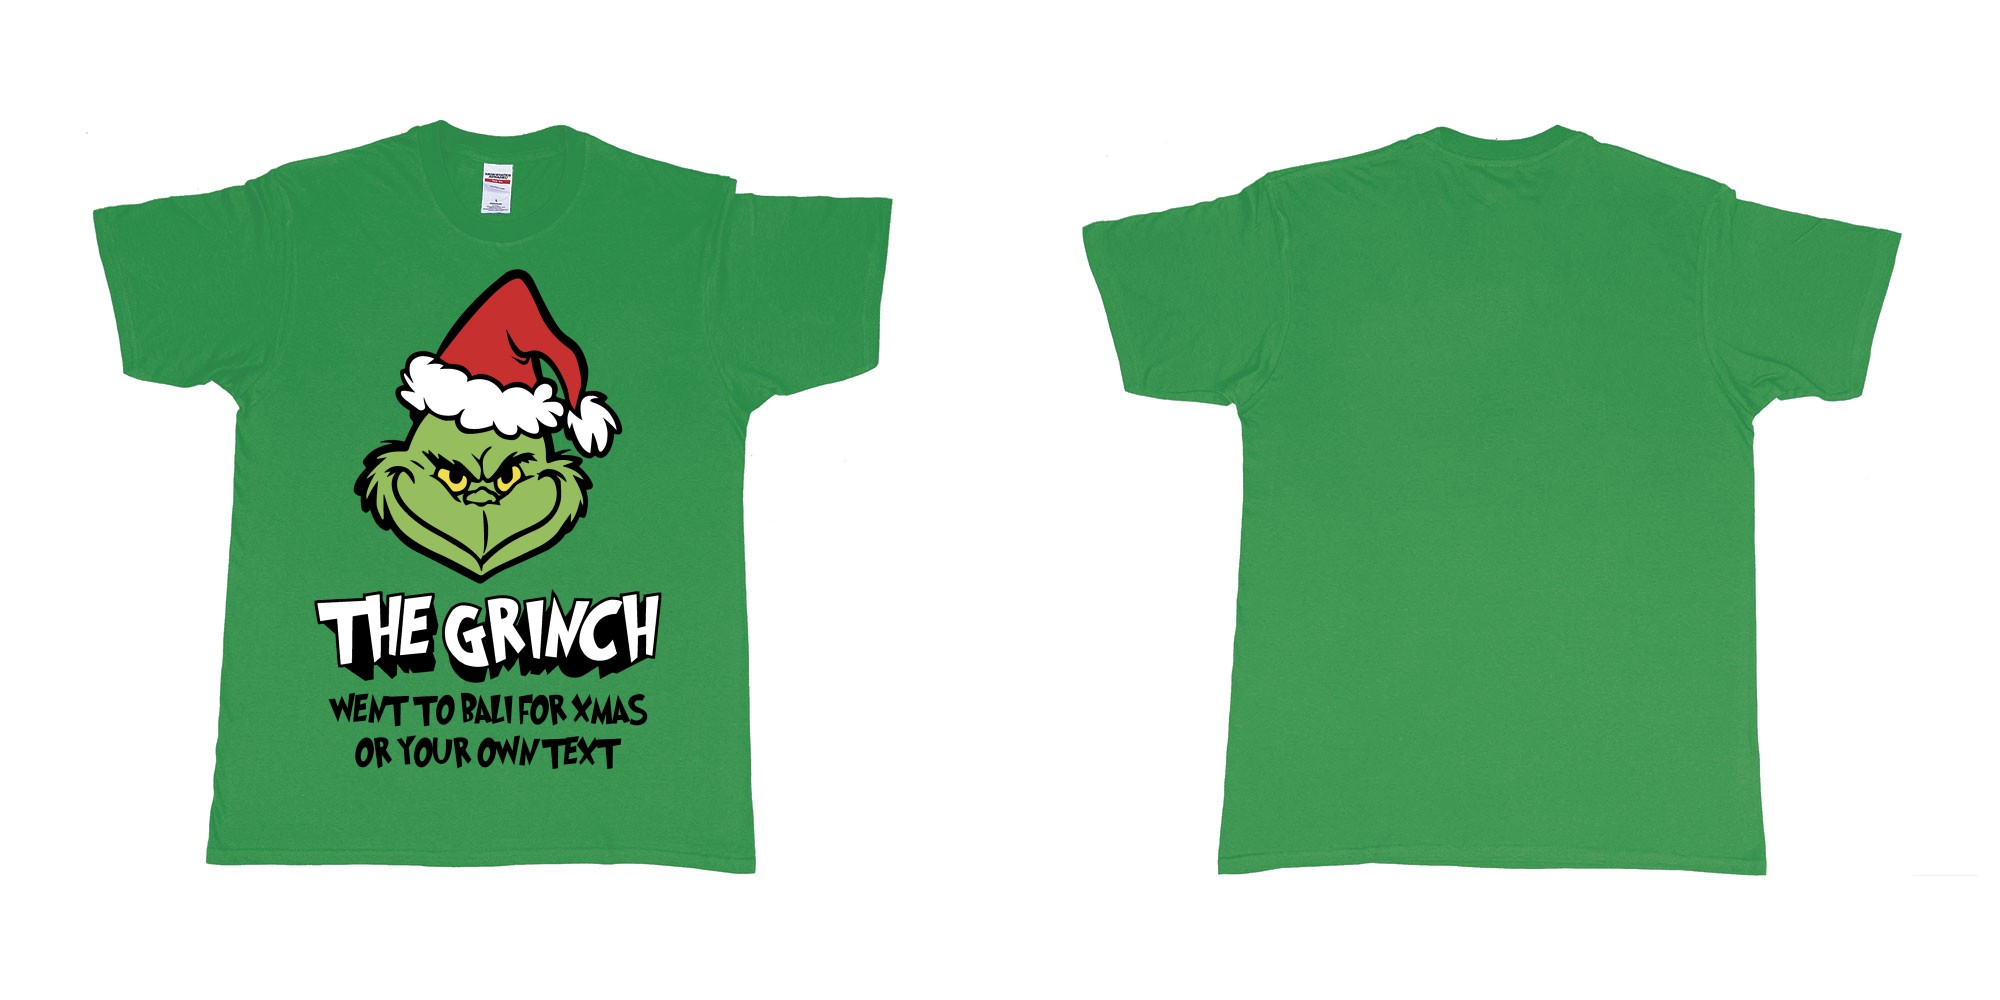 Custom tshirt design the grinch went to bali for xmas tshirt in fabric color irish-green choice your own text made in Bali by The Pirate Way